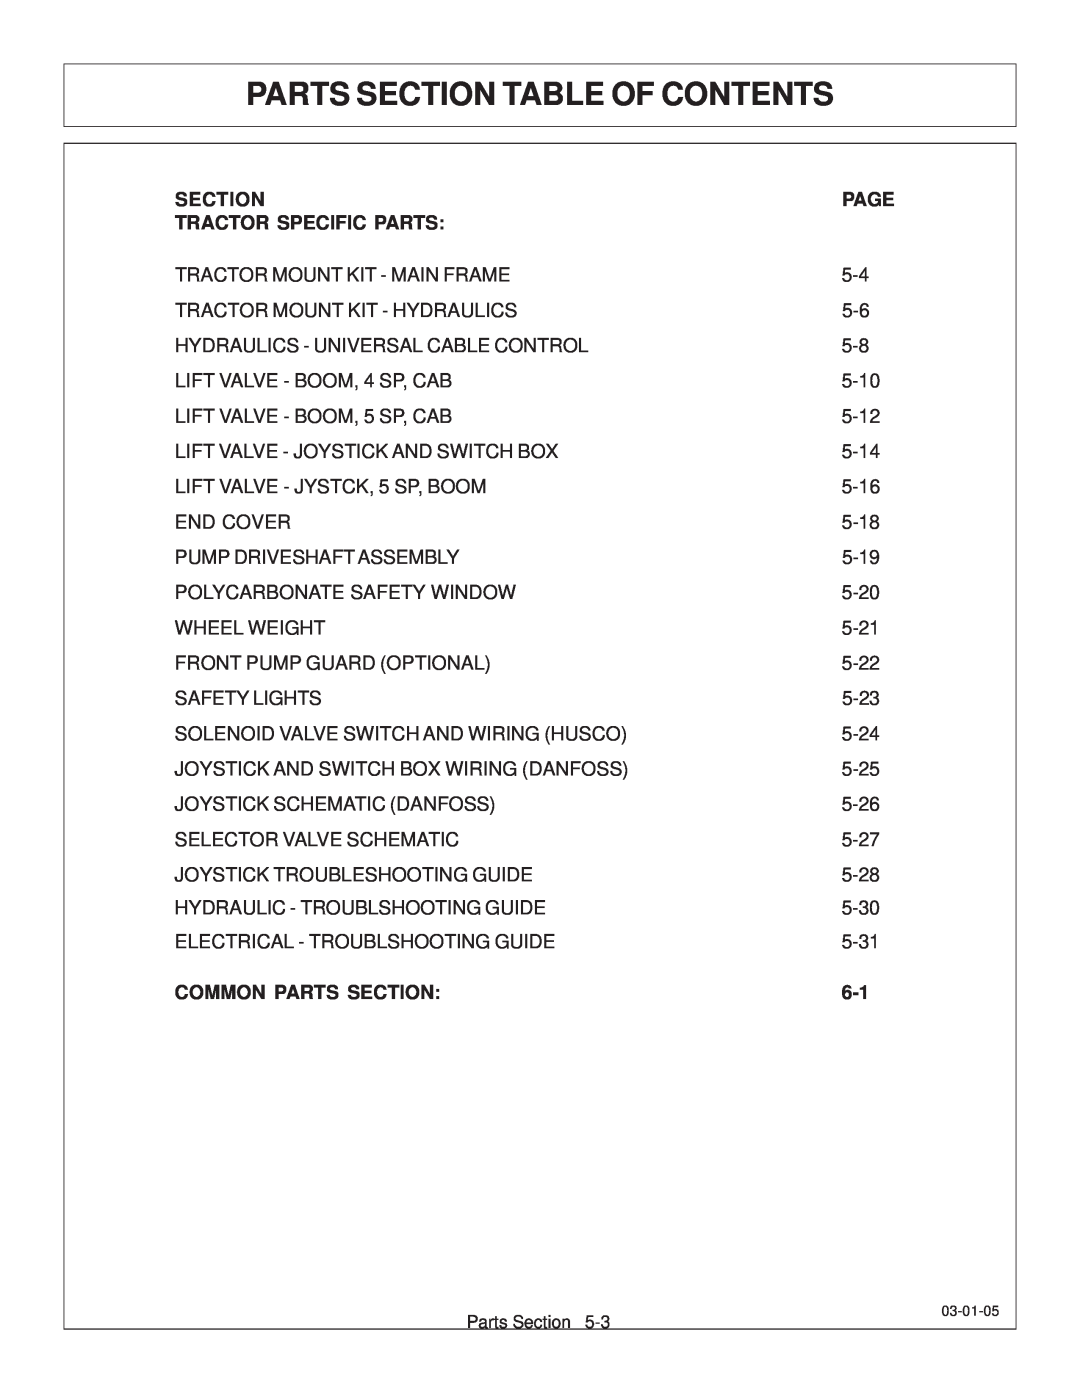 Tiger JD 62-6420 manual Parts Section Table Of Contents, Tractor Specific Parts, Common Parts Section 